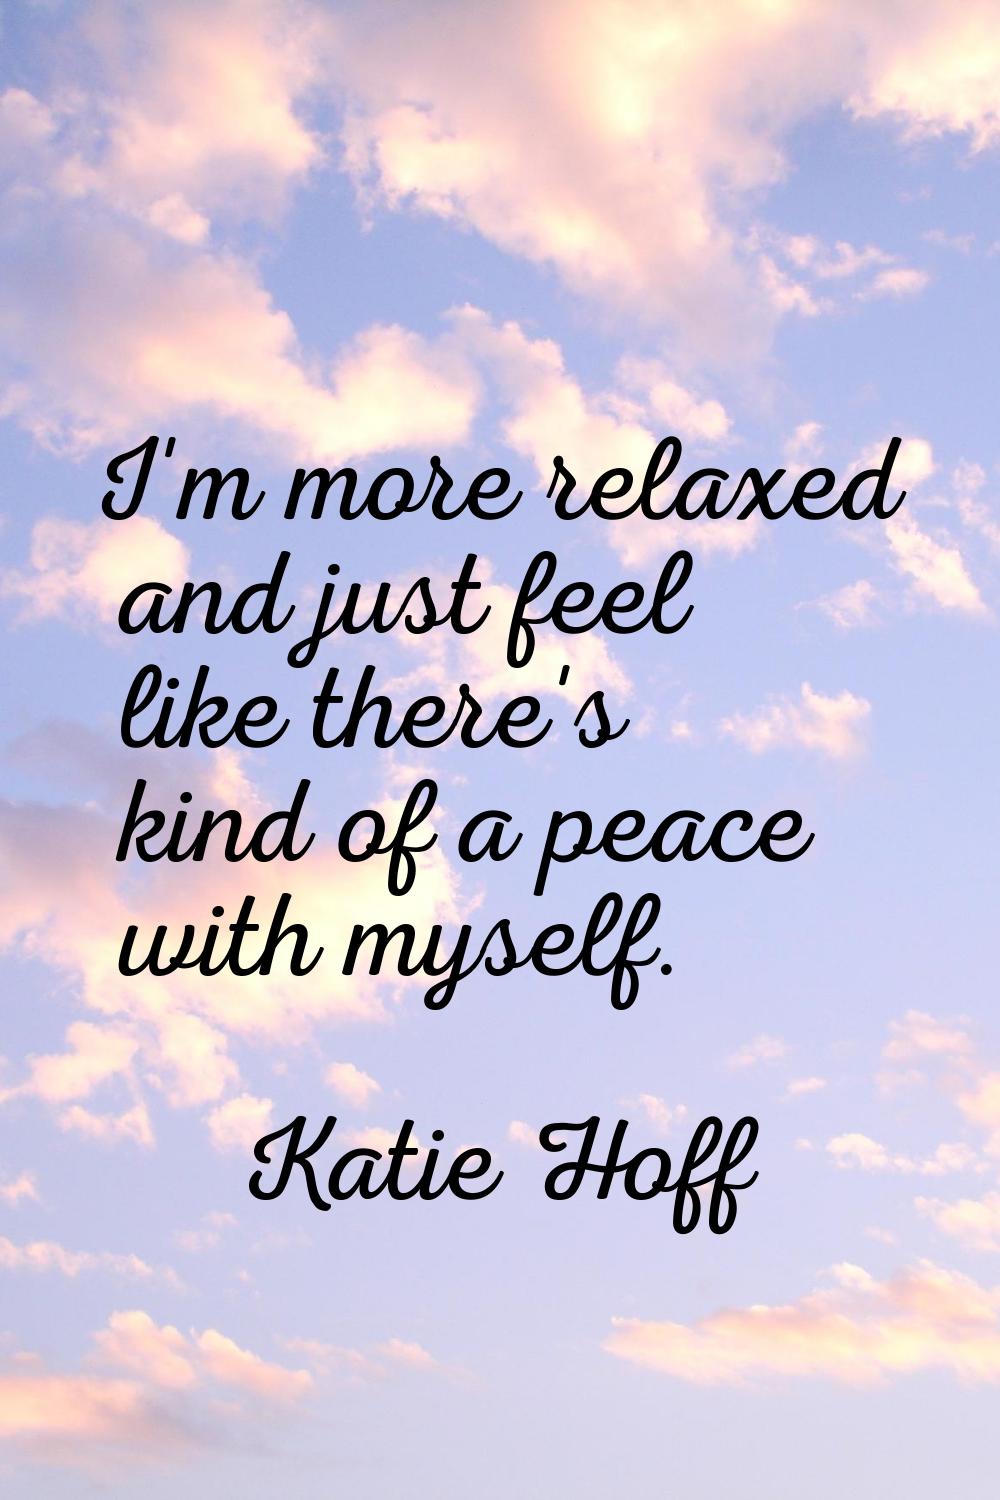 I'm more relaxed and just feel like there's kind of a peace with myself.